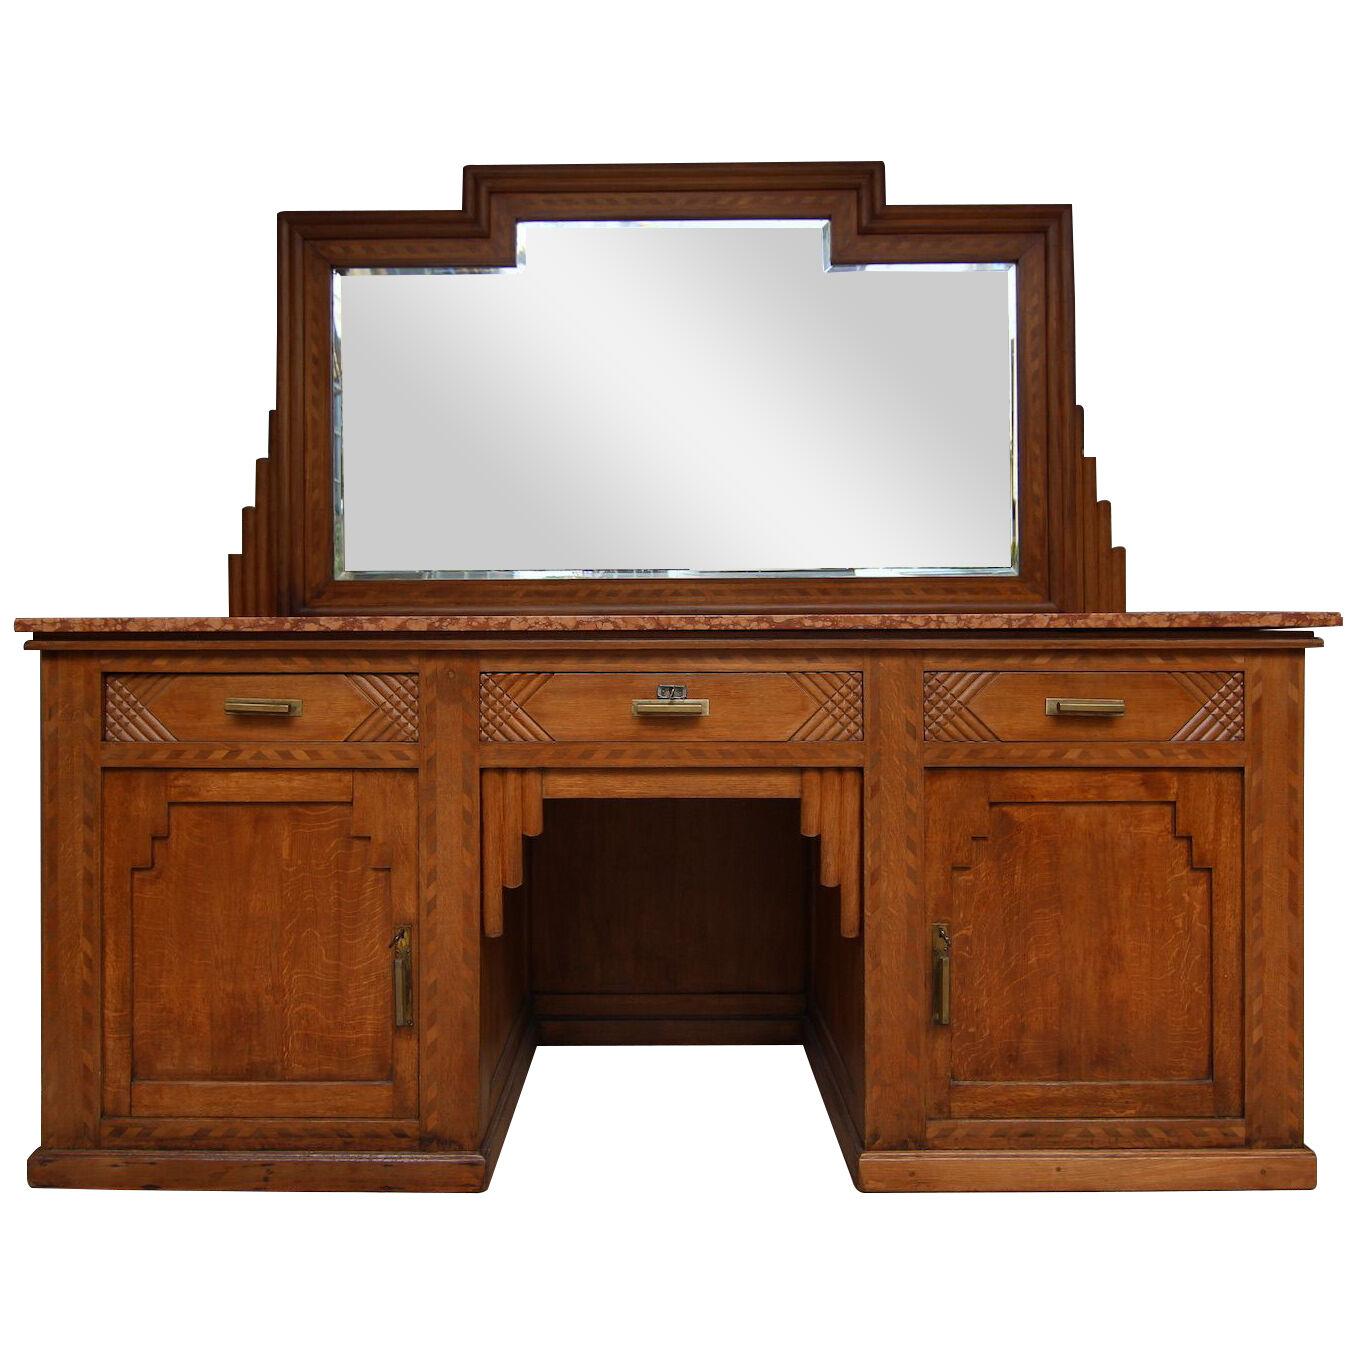 Early 20th Century French Art Deco Barbershop Dressing Table